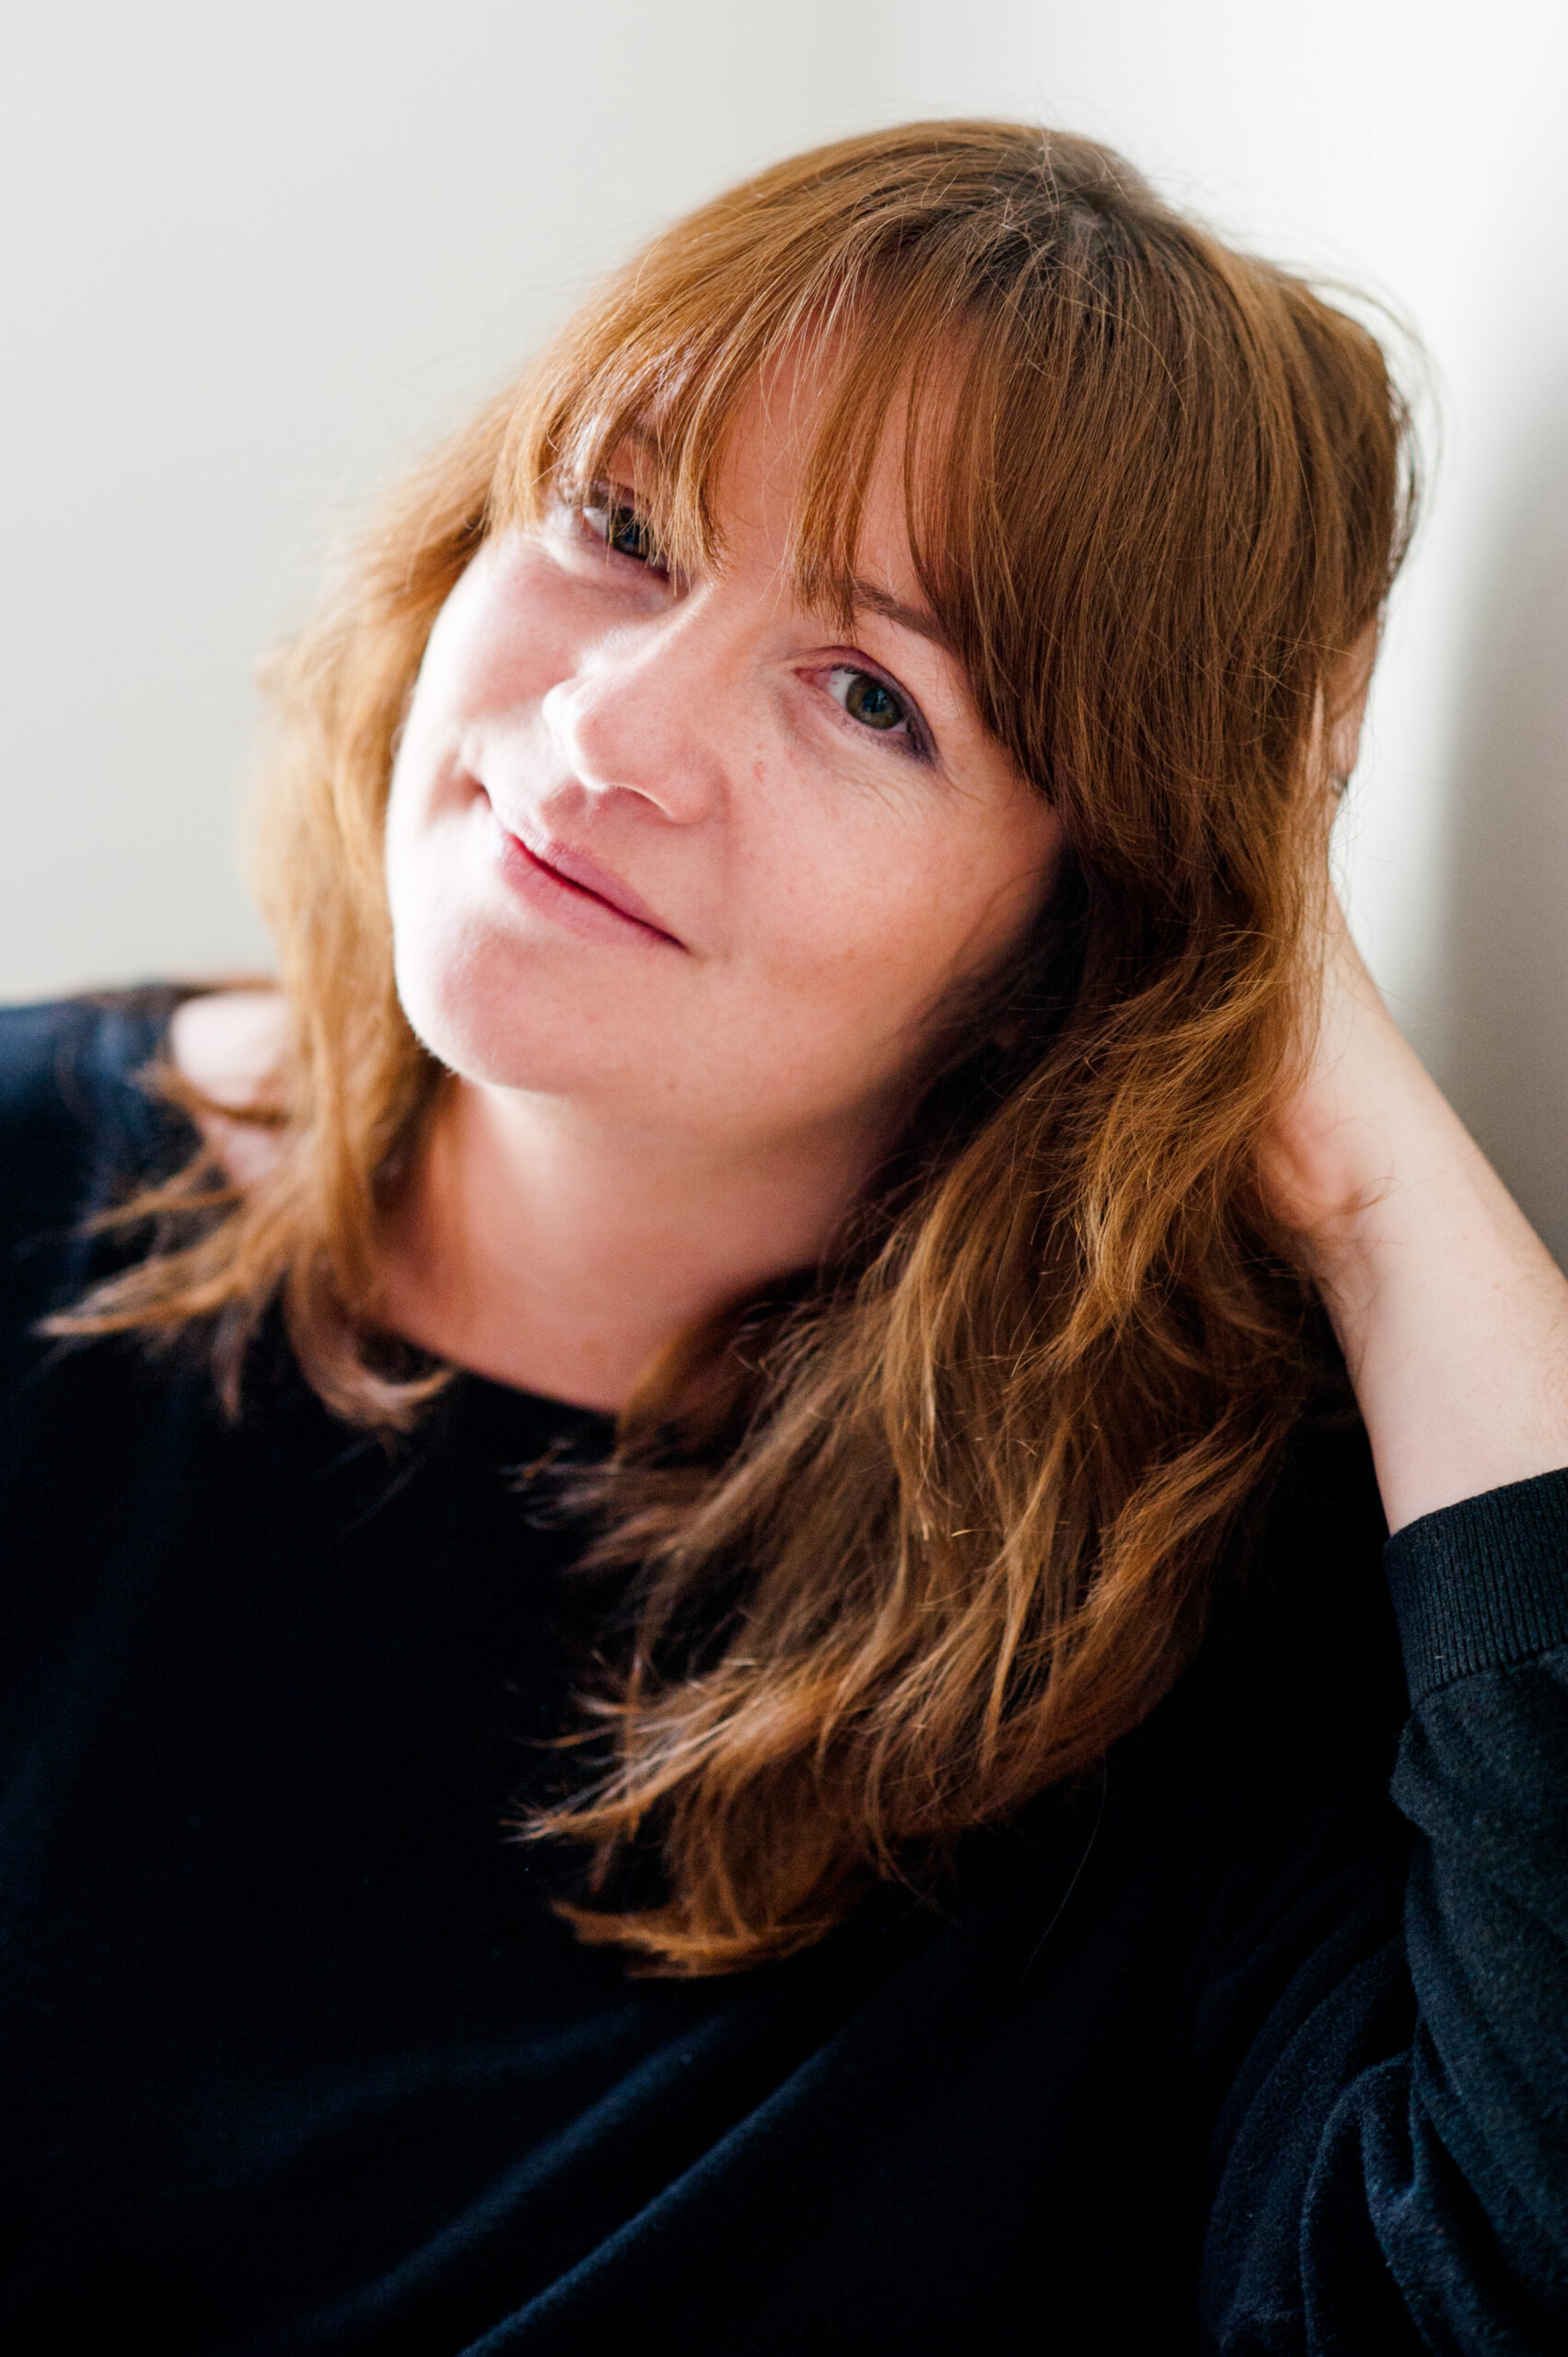 “You only need one publisher to love your work” – Eimear McBride